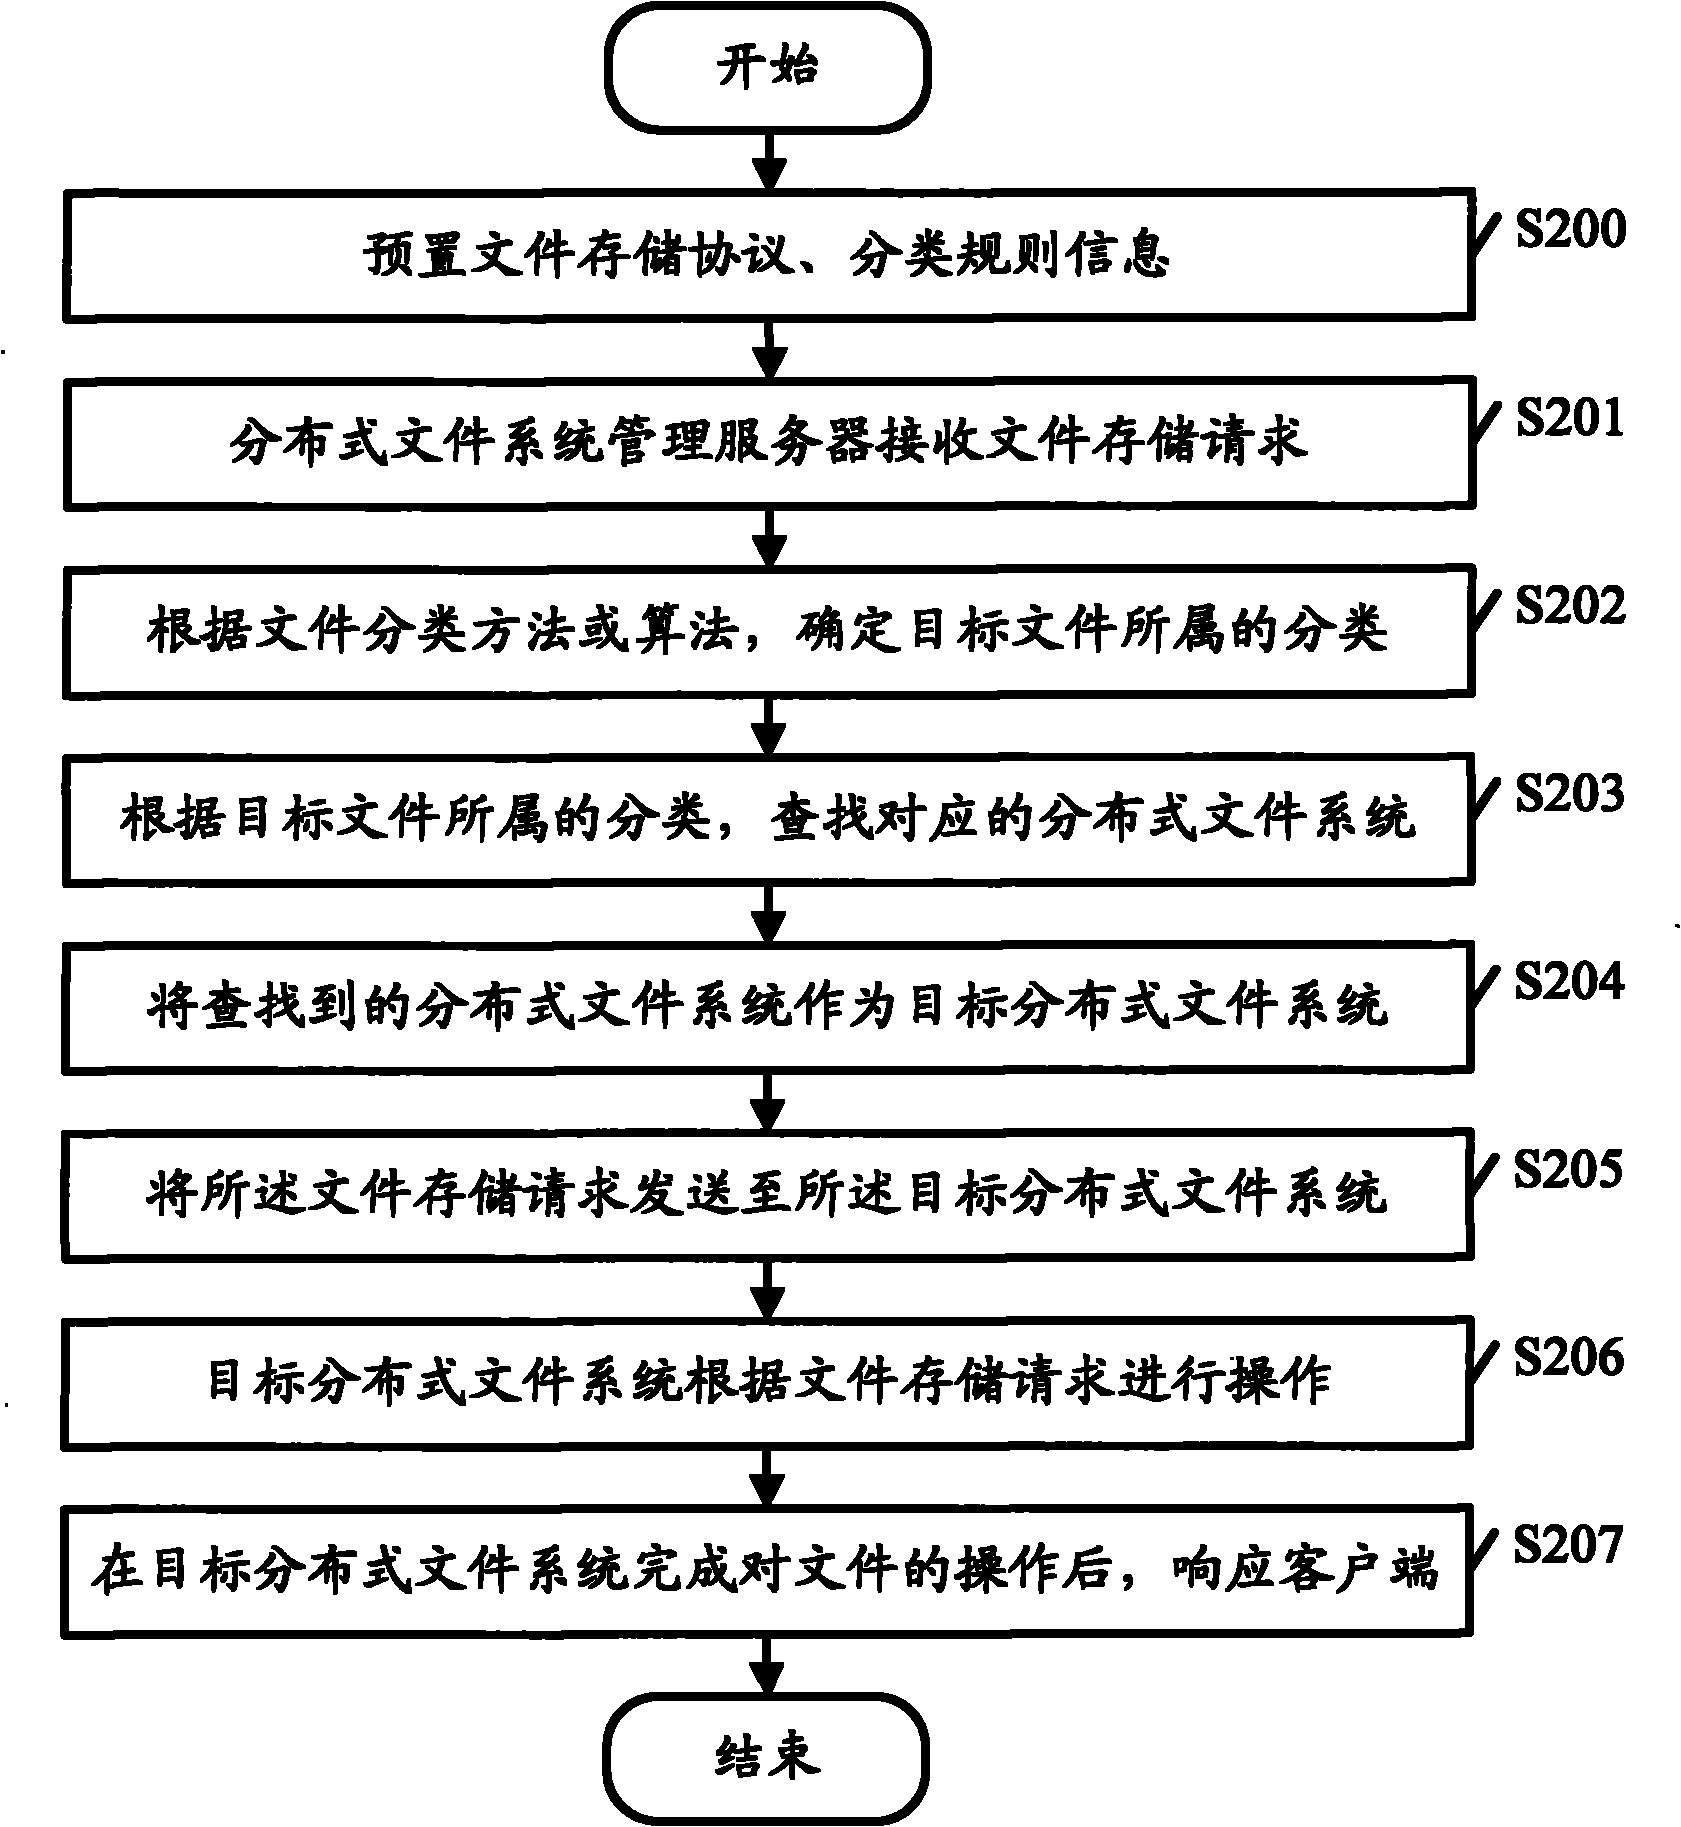 Distributed file system management method, device and corresponding file system